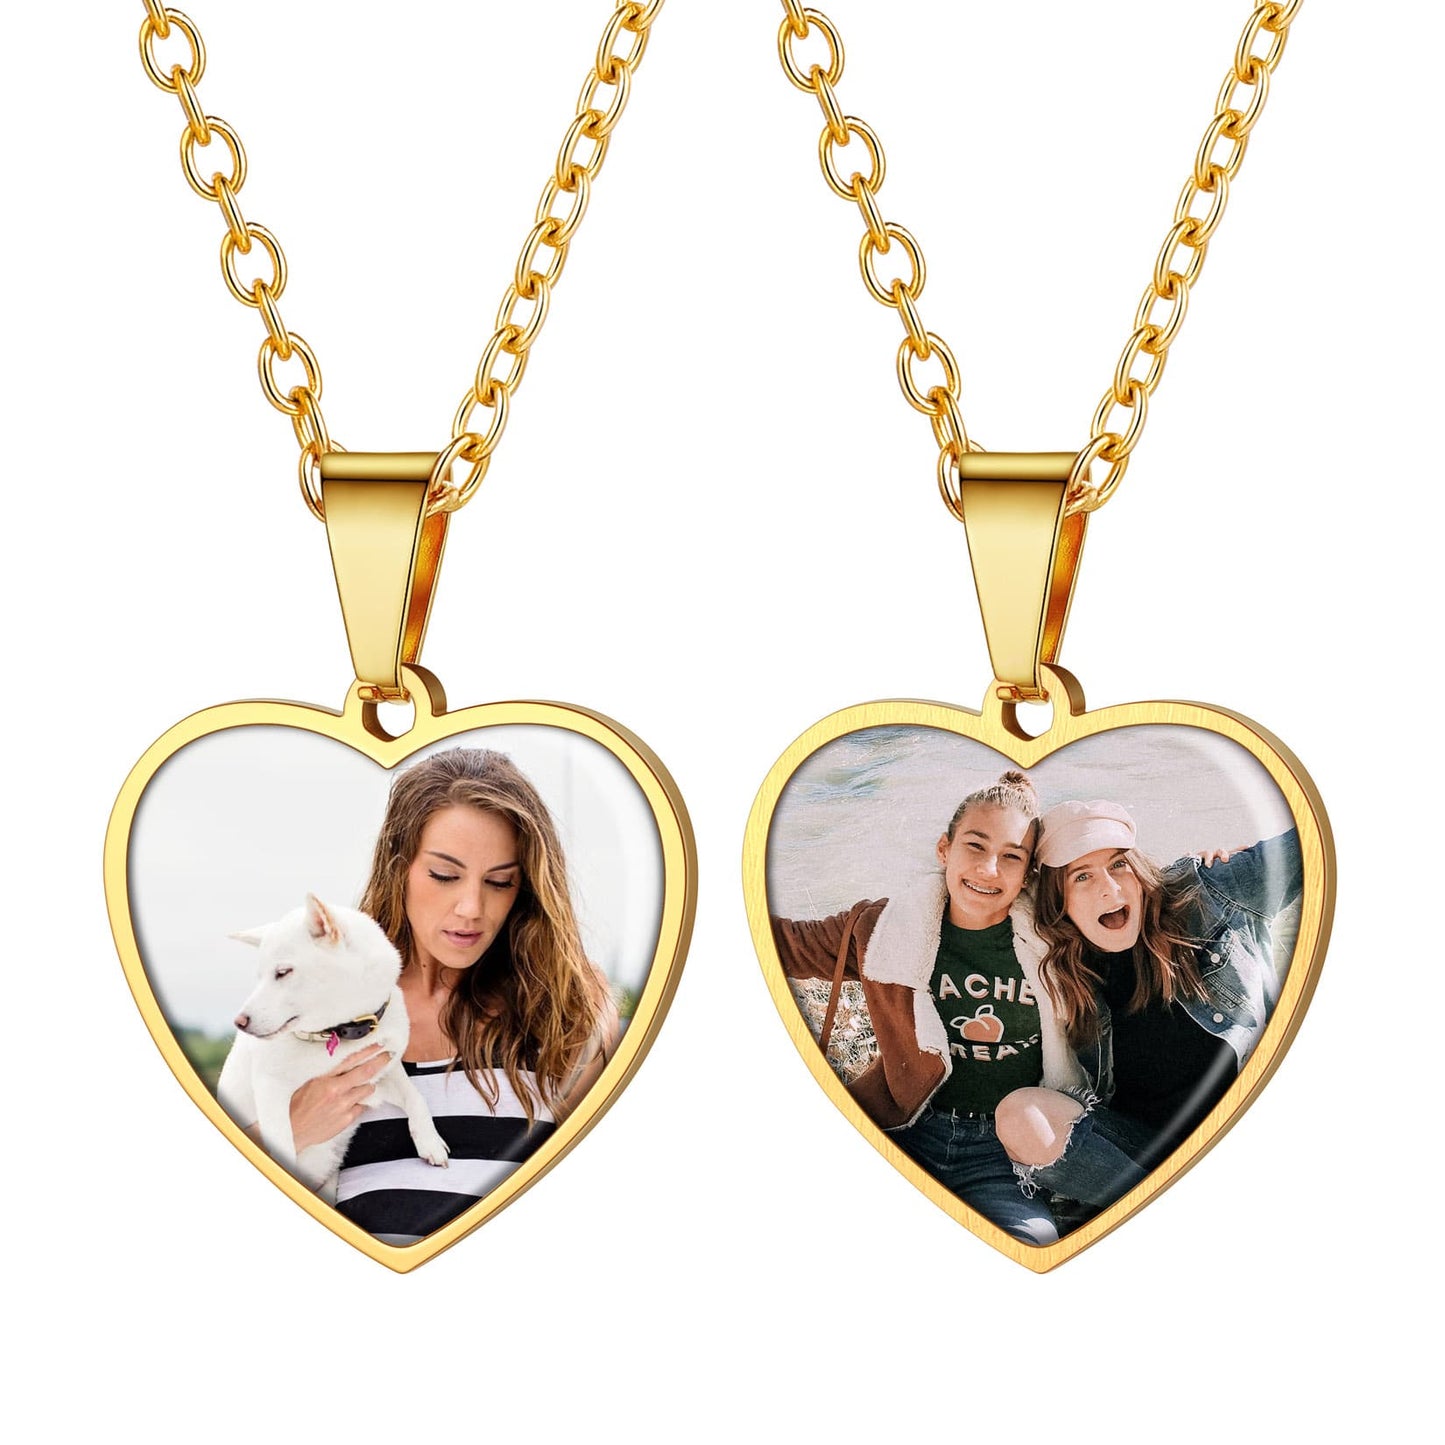 Birthstonesjewelry Personalized Heart Double Sided Picture Necklace Gold